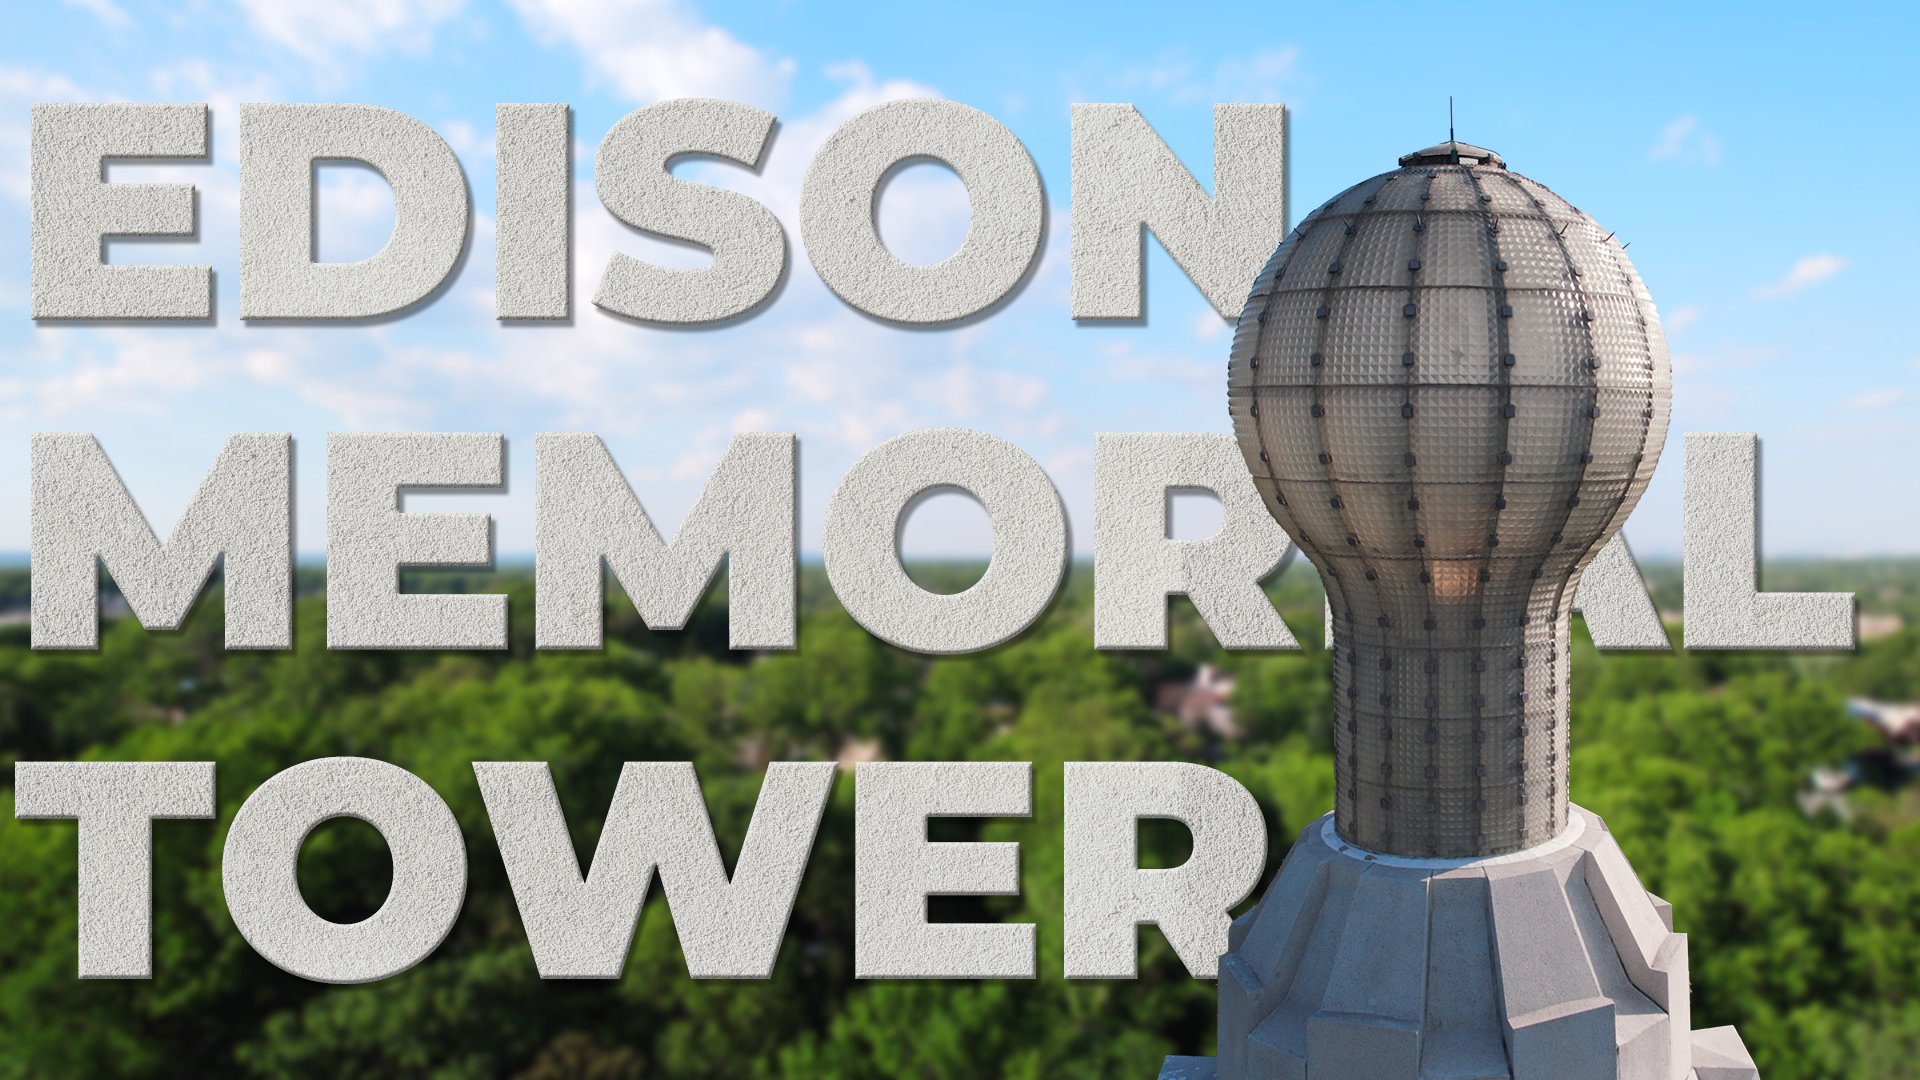 The YouTube Thumbnail for Thomas Edison Memorial Tower in 4k video